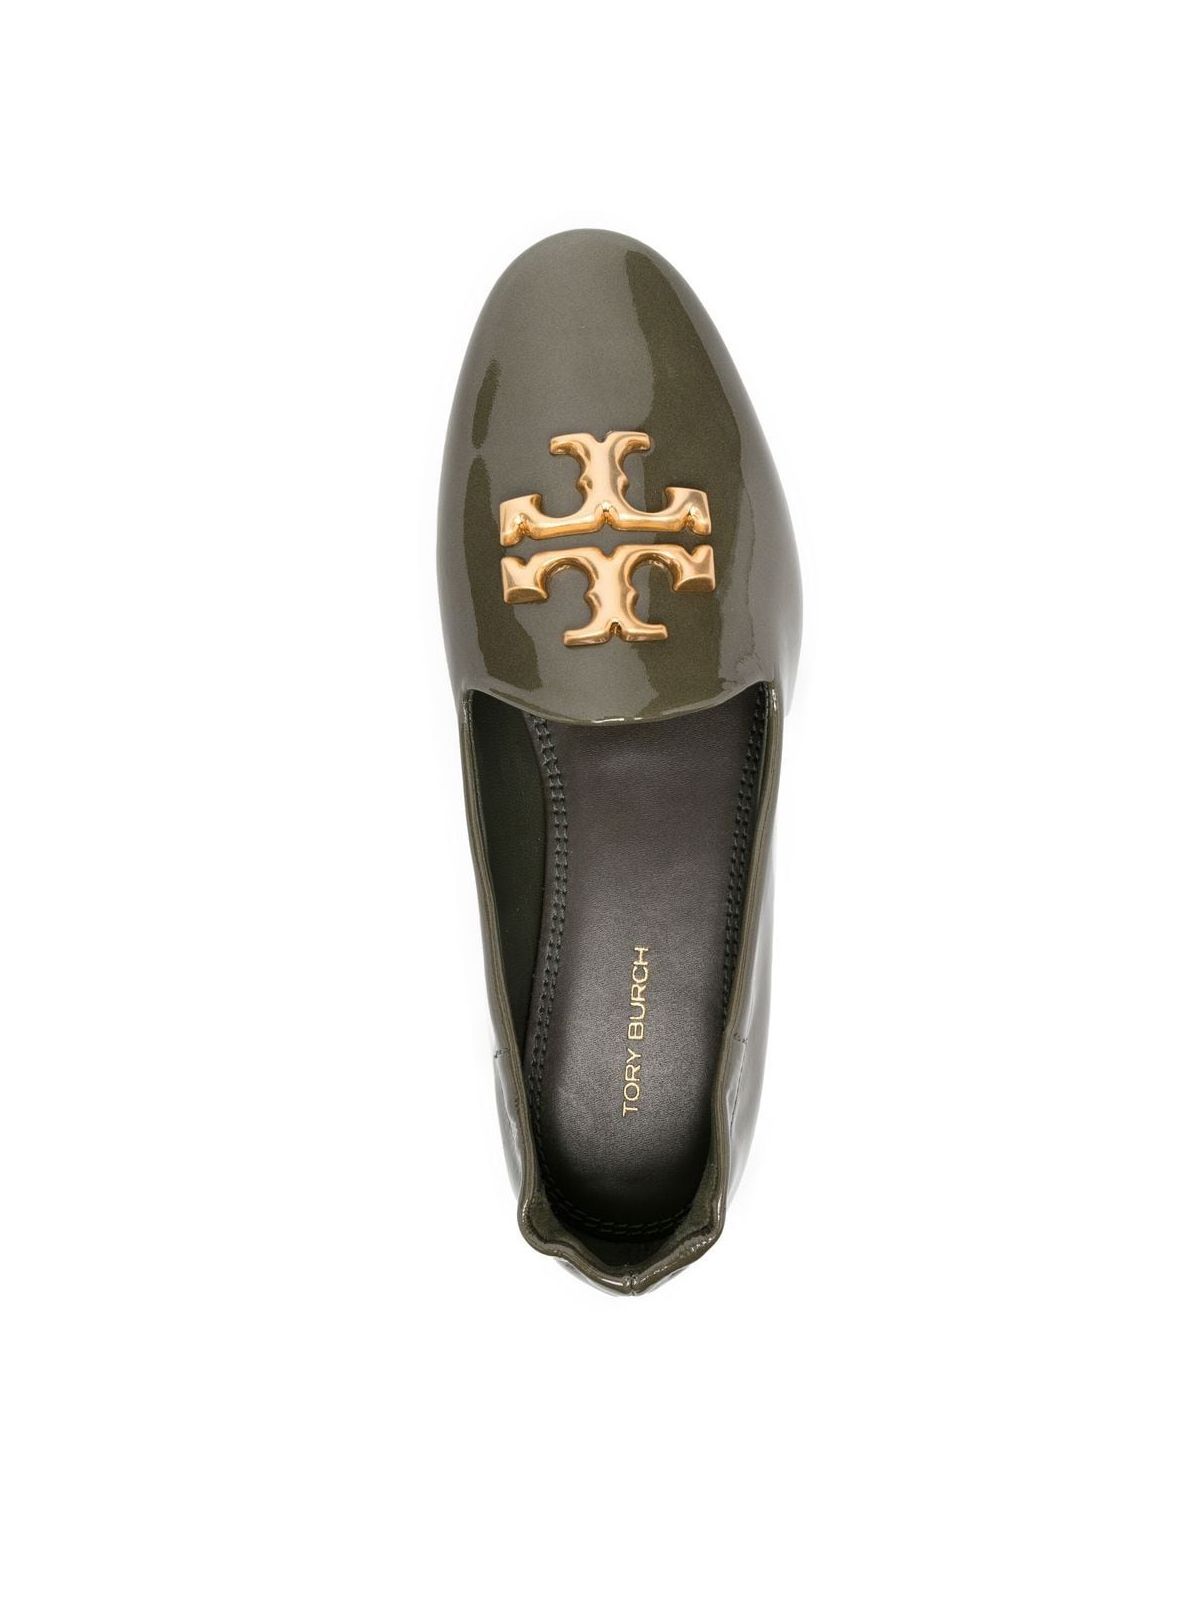 Shop Tory Burch Eleanor Loafer